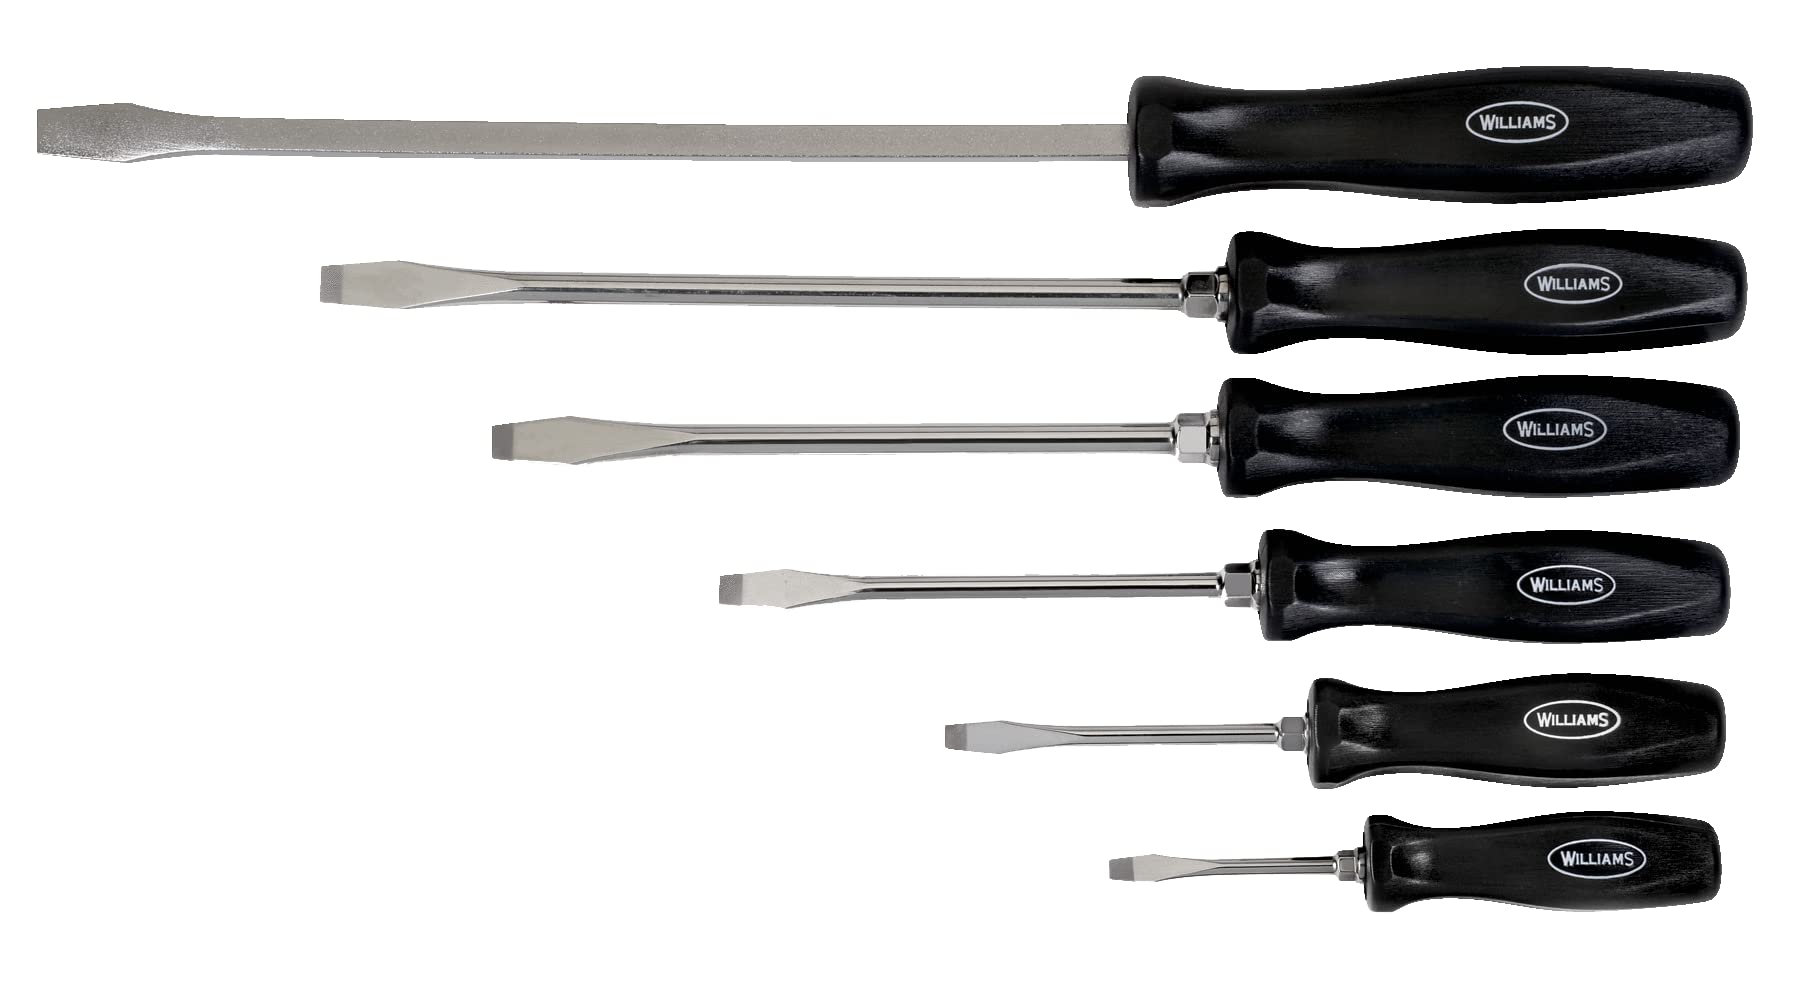 Williams 100P-6SD 6-Piece Premium Slotted Screwdriver Set by Snap-on Industrial Brand JH Williams 並行輸入品並行輸